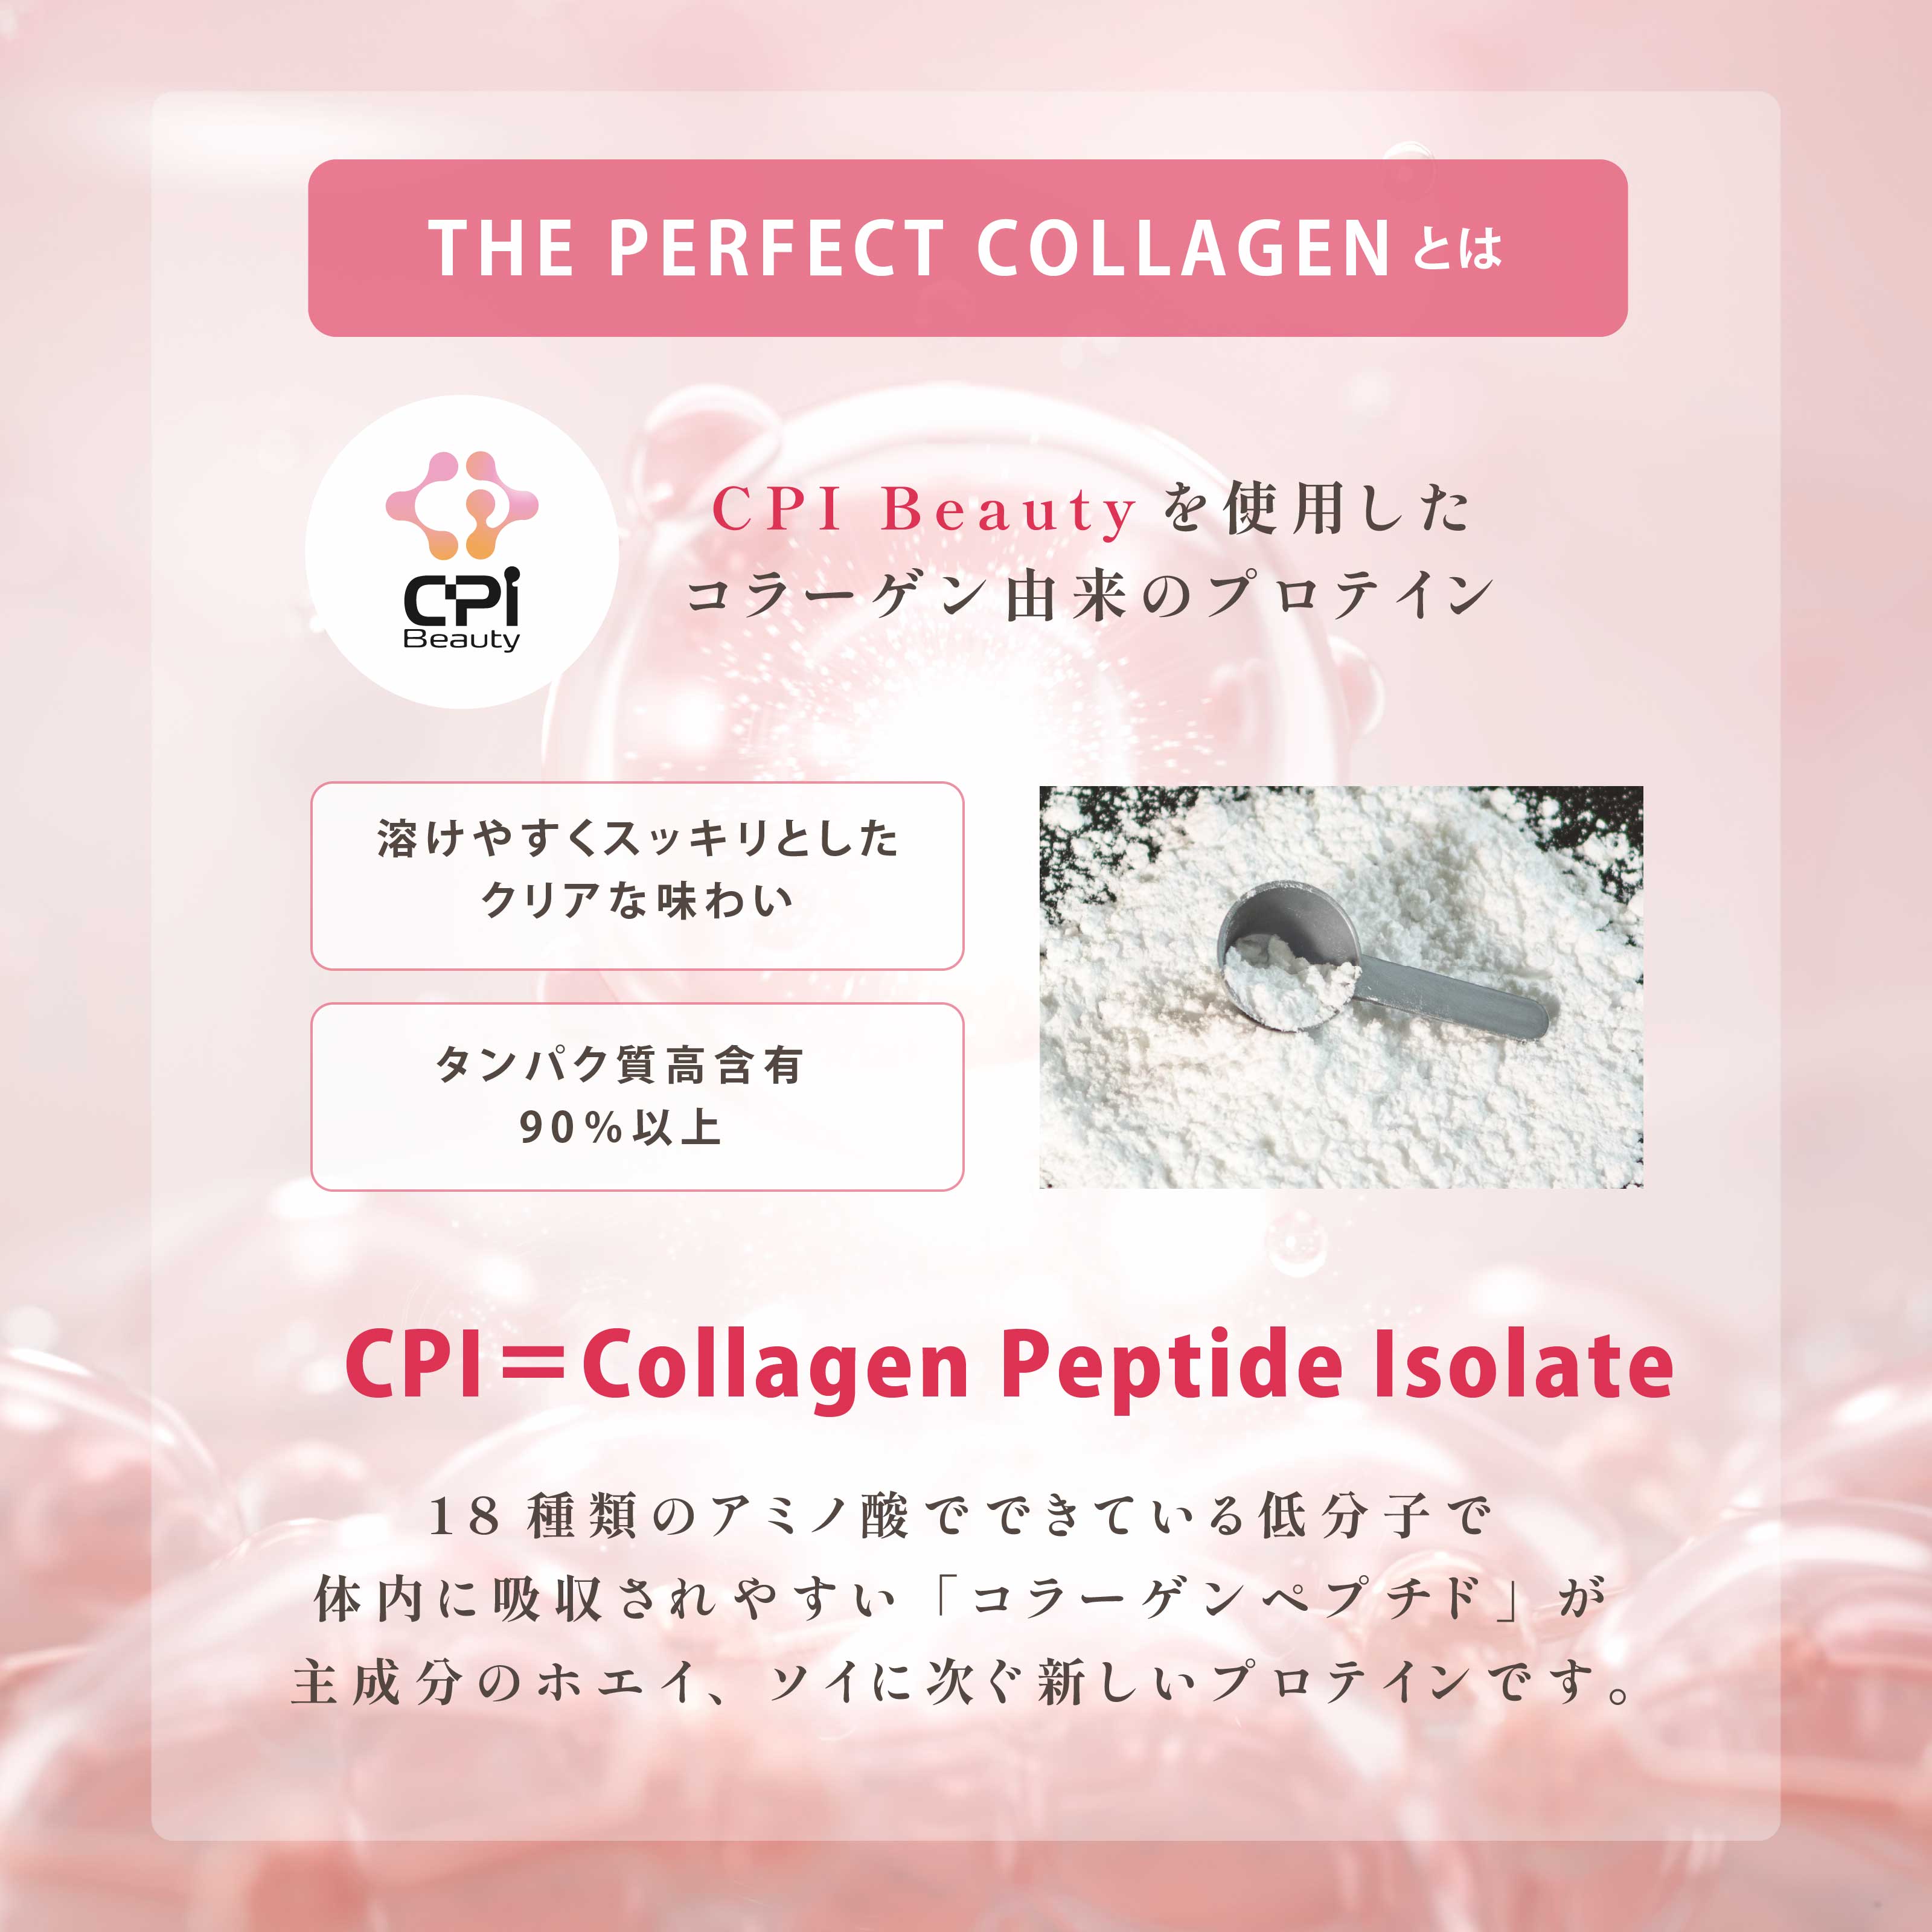 Daily Protein THE PERFECT COLLAGEN ミックスベリー味 285g – ALLUP SHOP